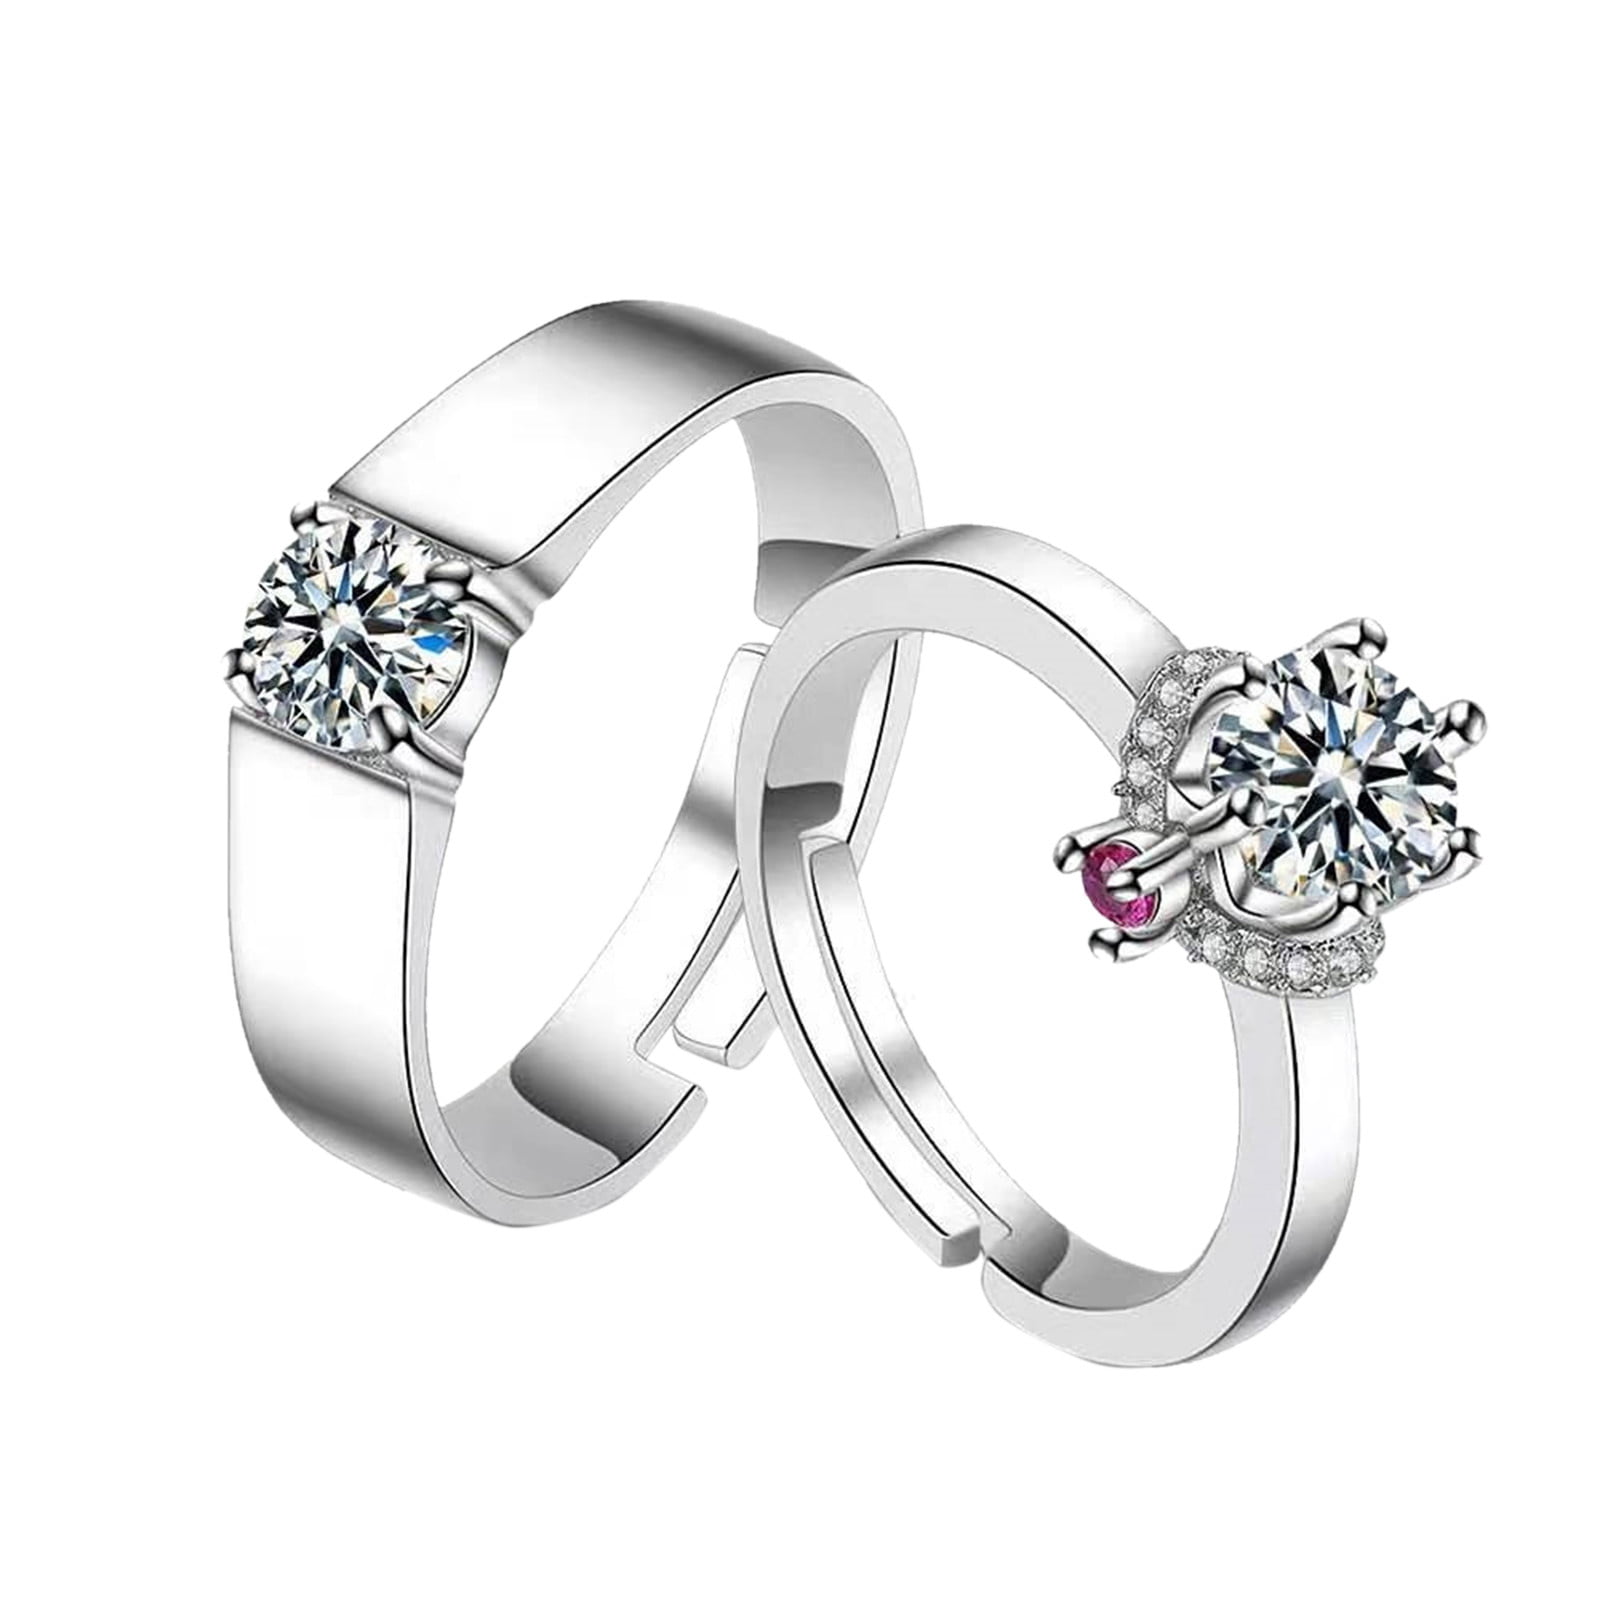 Bridal set: promise rings, wedding bands - Cartier